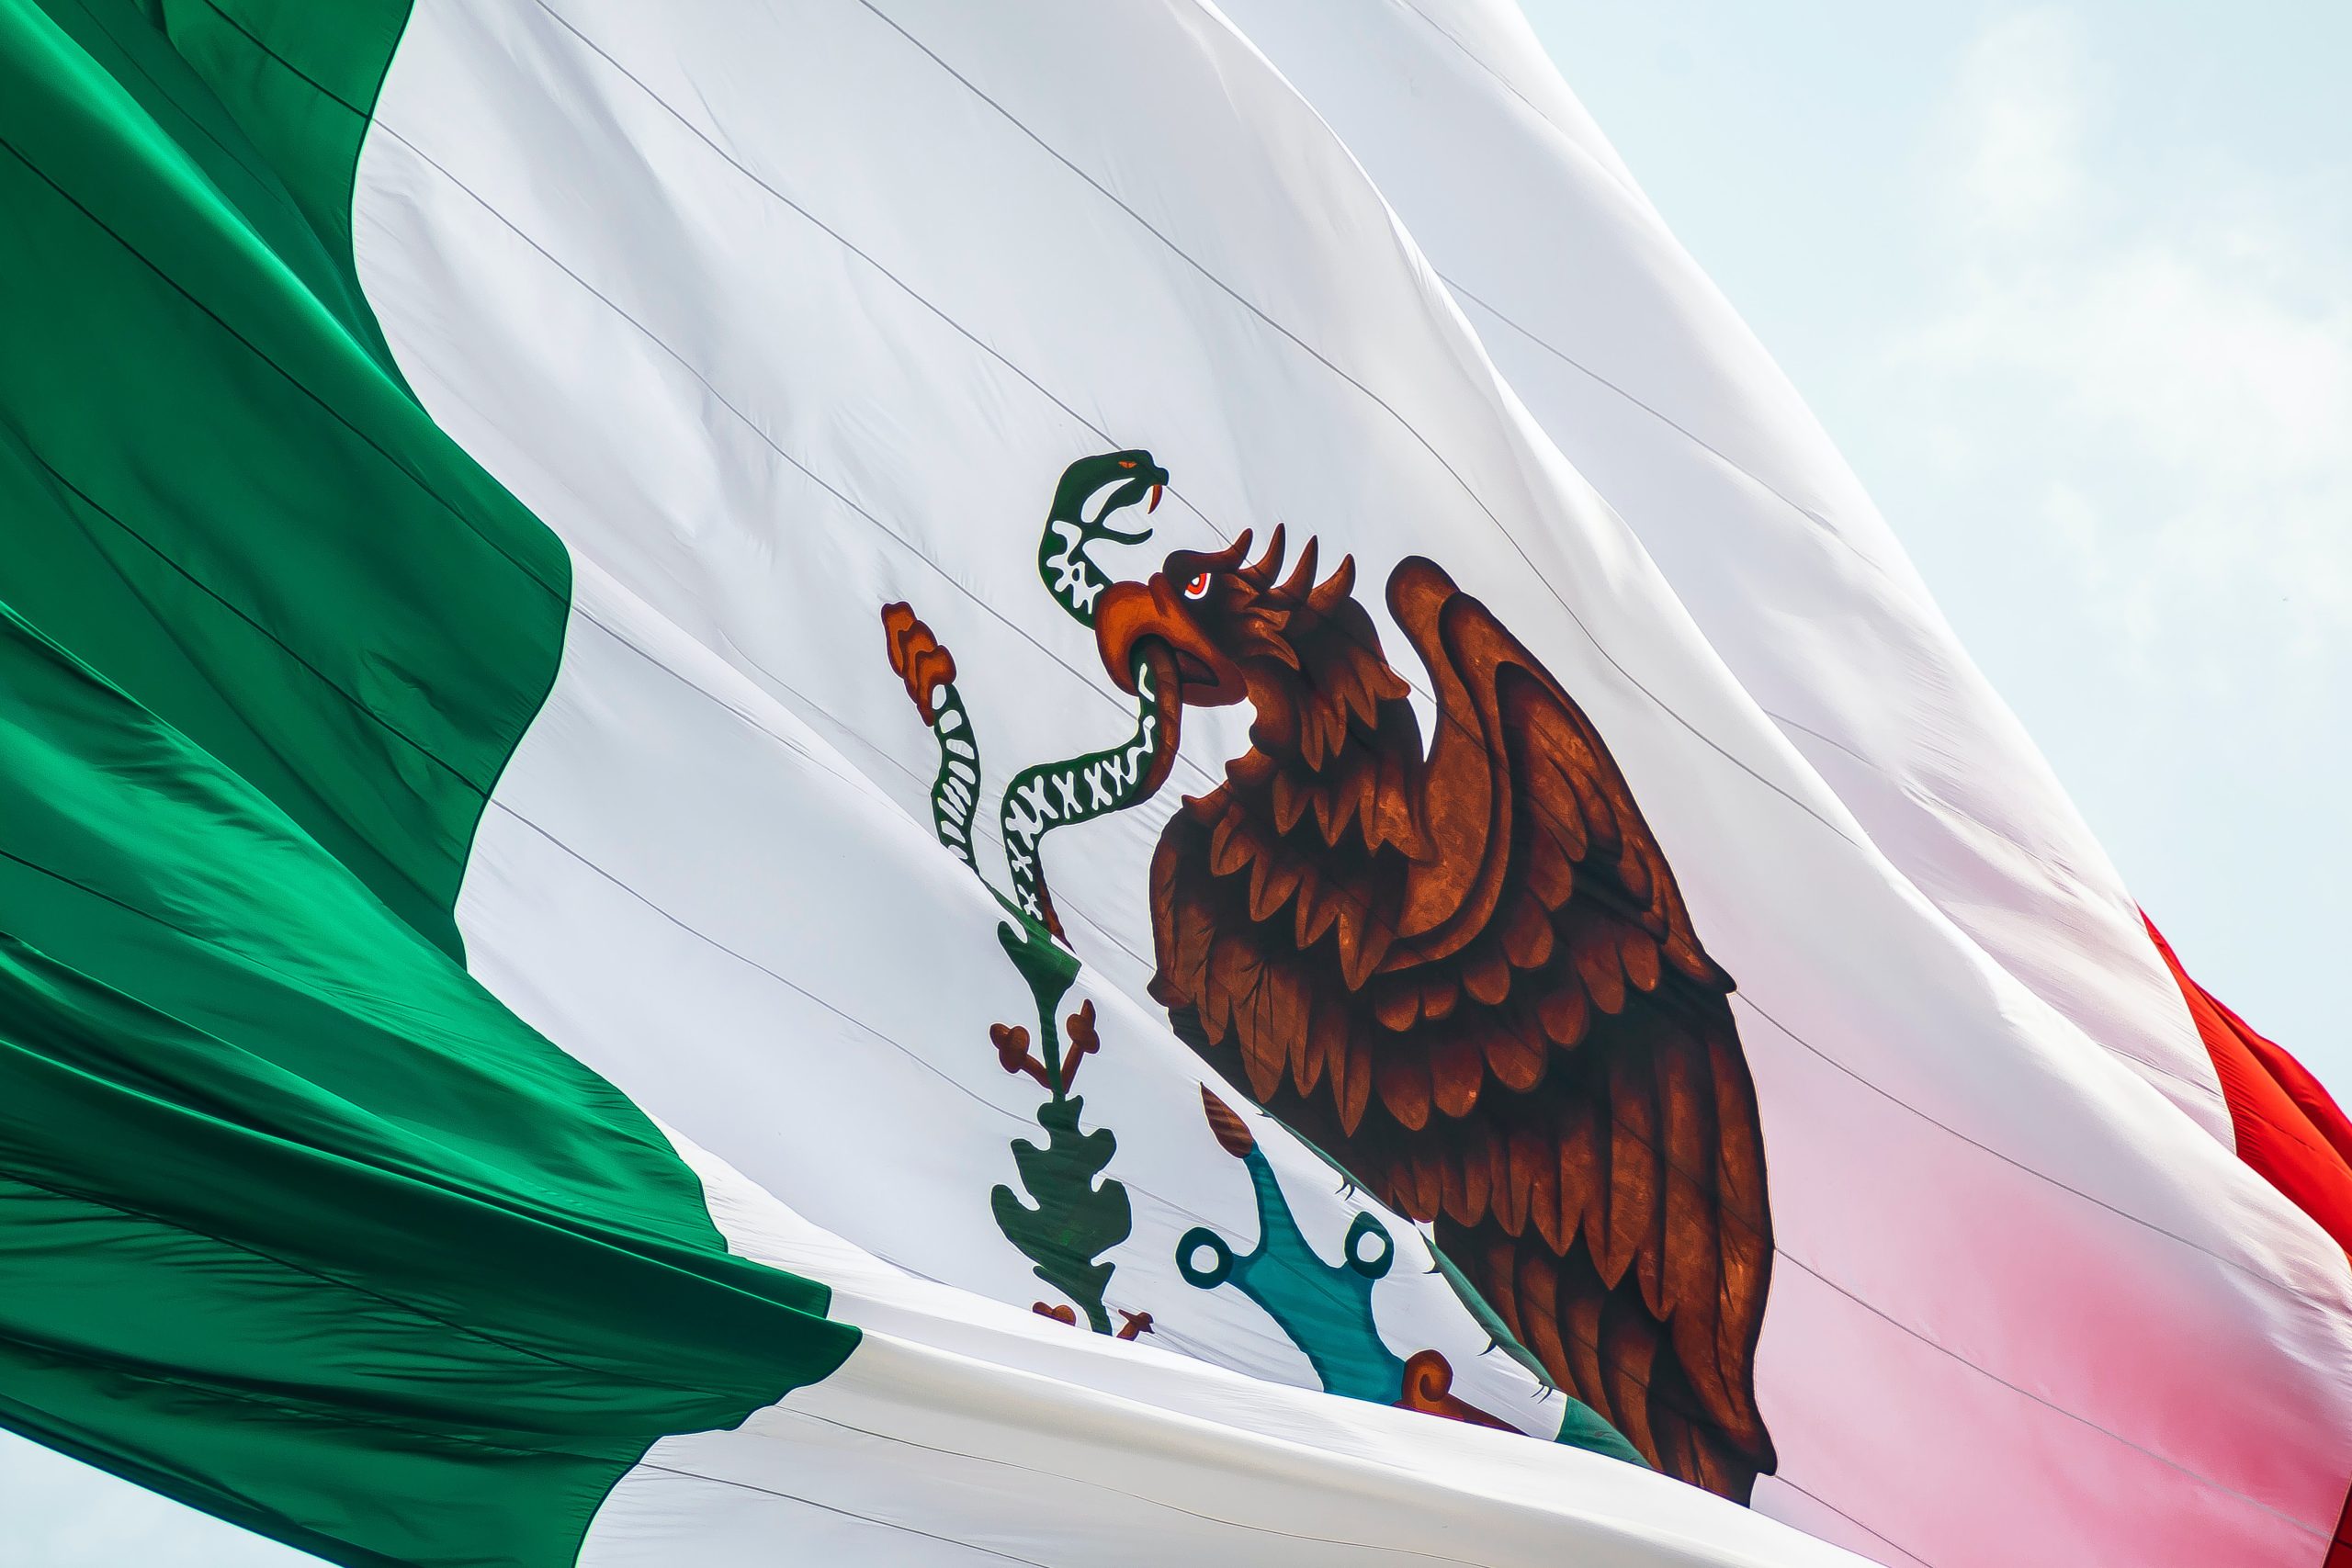 Mex Yanks Licenses Recently Issued To Several Casinos Scaled 